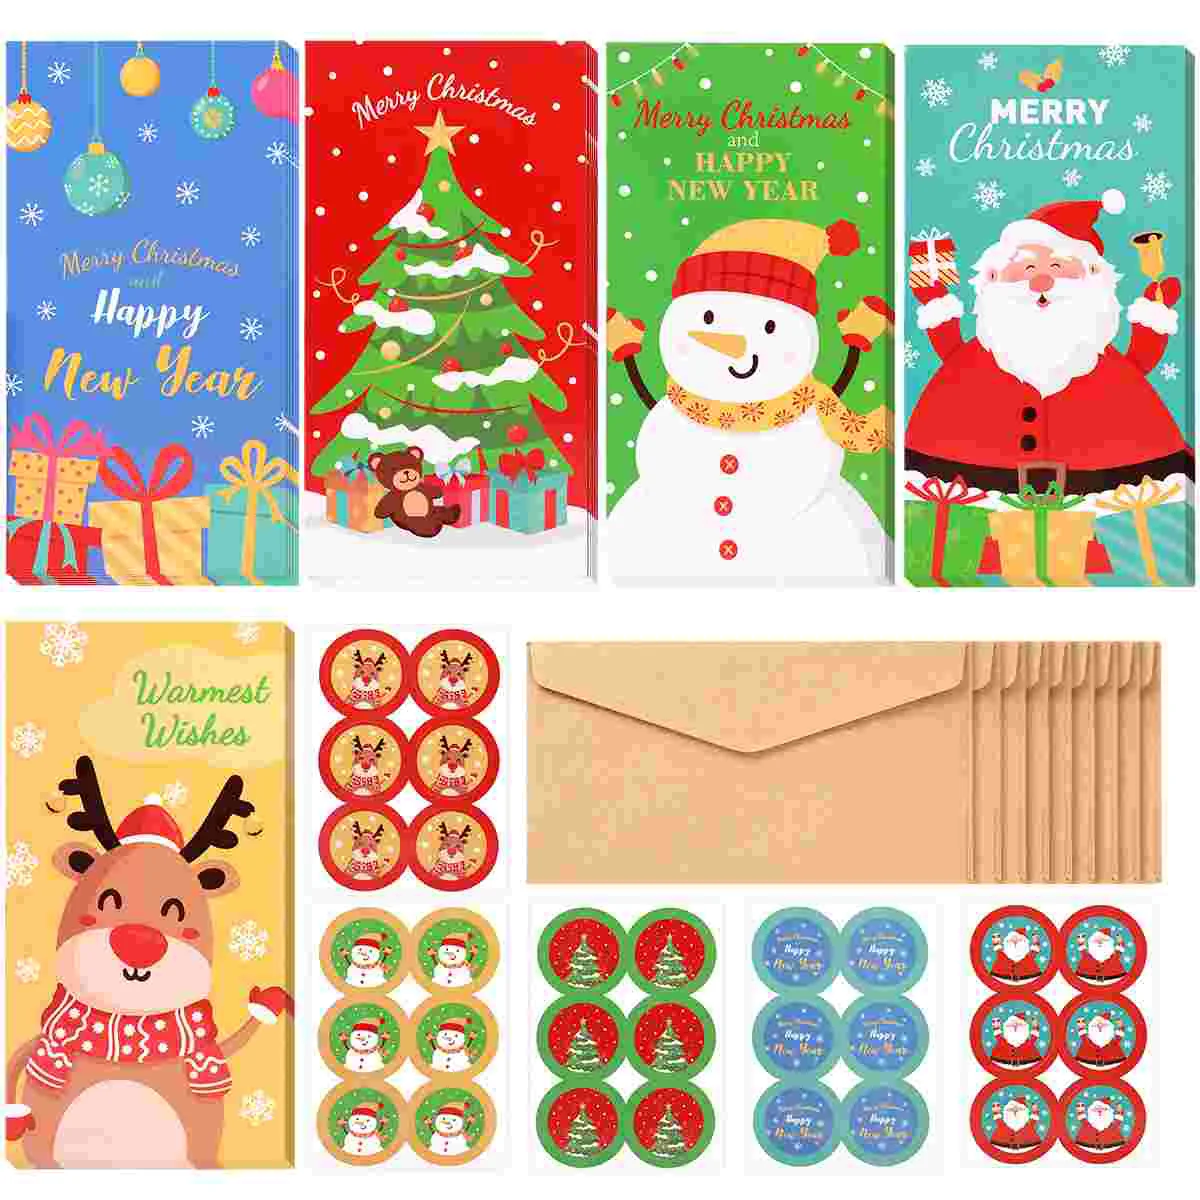 

PRETYZOOM 30pcs Christmas Gift Cards with Envelopes 30-count Set Xmas Money Wallet 5 Patterns Greet Cards with Holders and